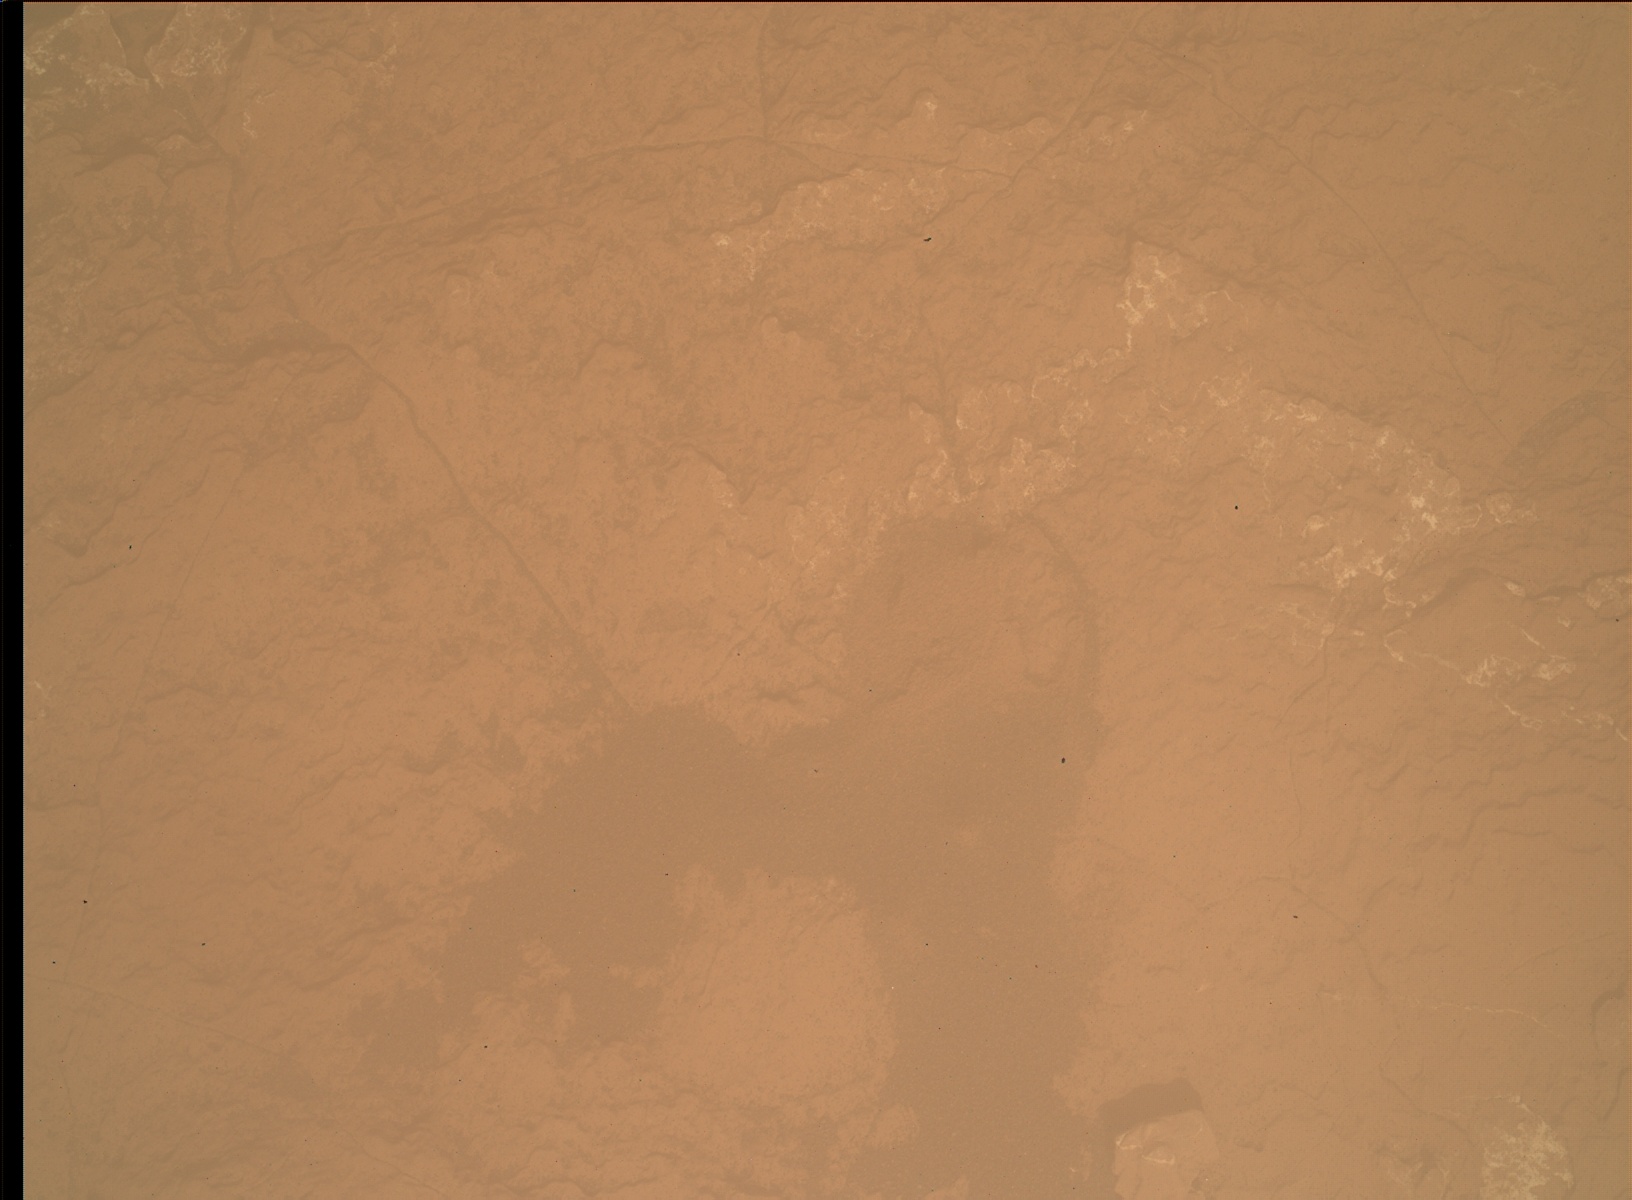 Nasa's Mars rover Curiosity acquired this image using its Mars Hand Lens Imager (MAHLI) on Sol 1534